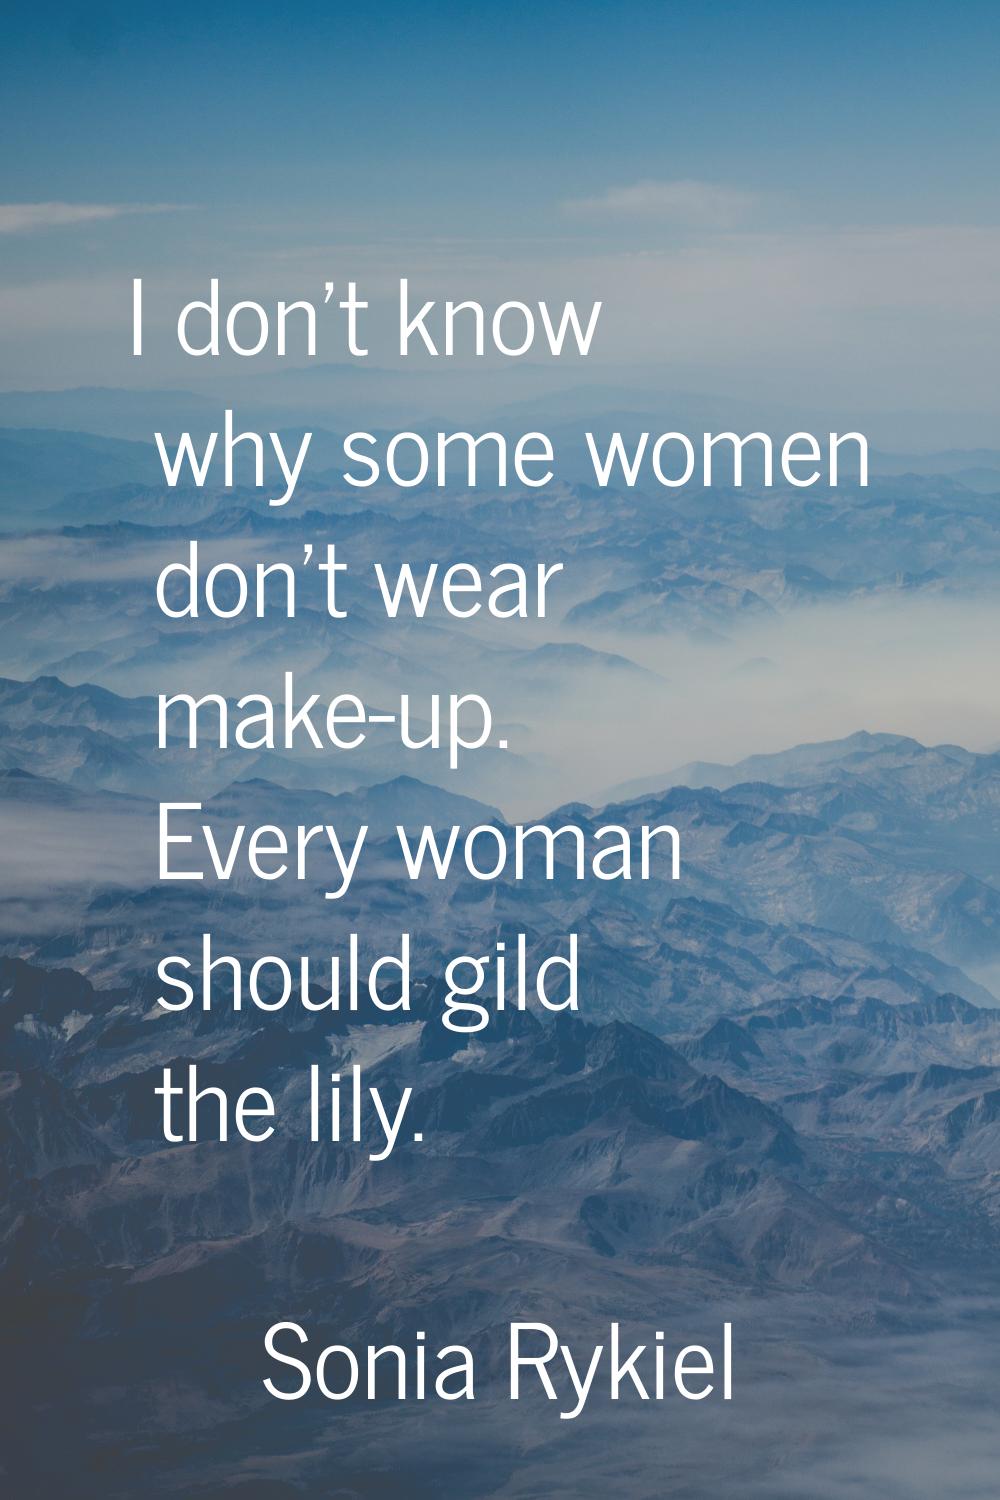 I don't know why some women don't wear make-up. Every woman should gild the lily.